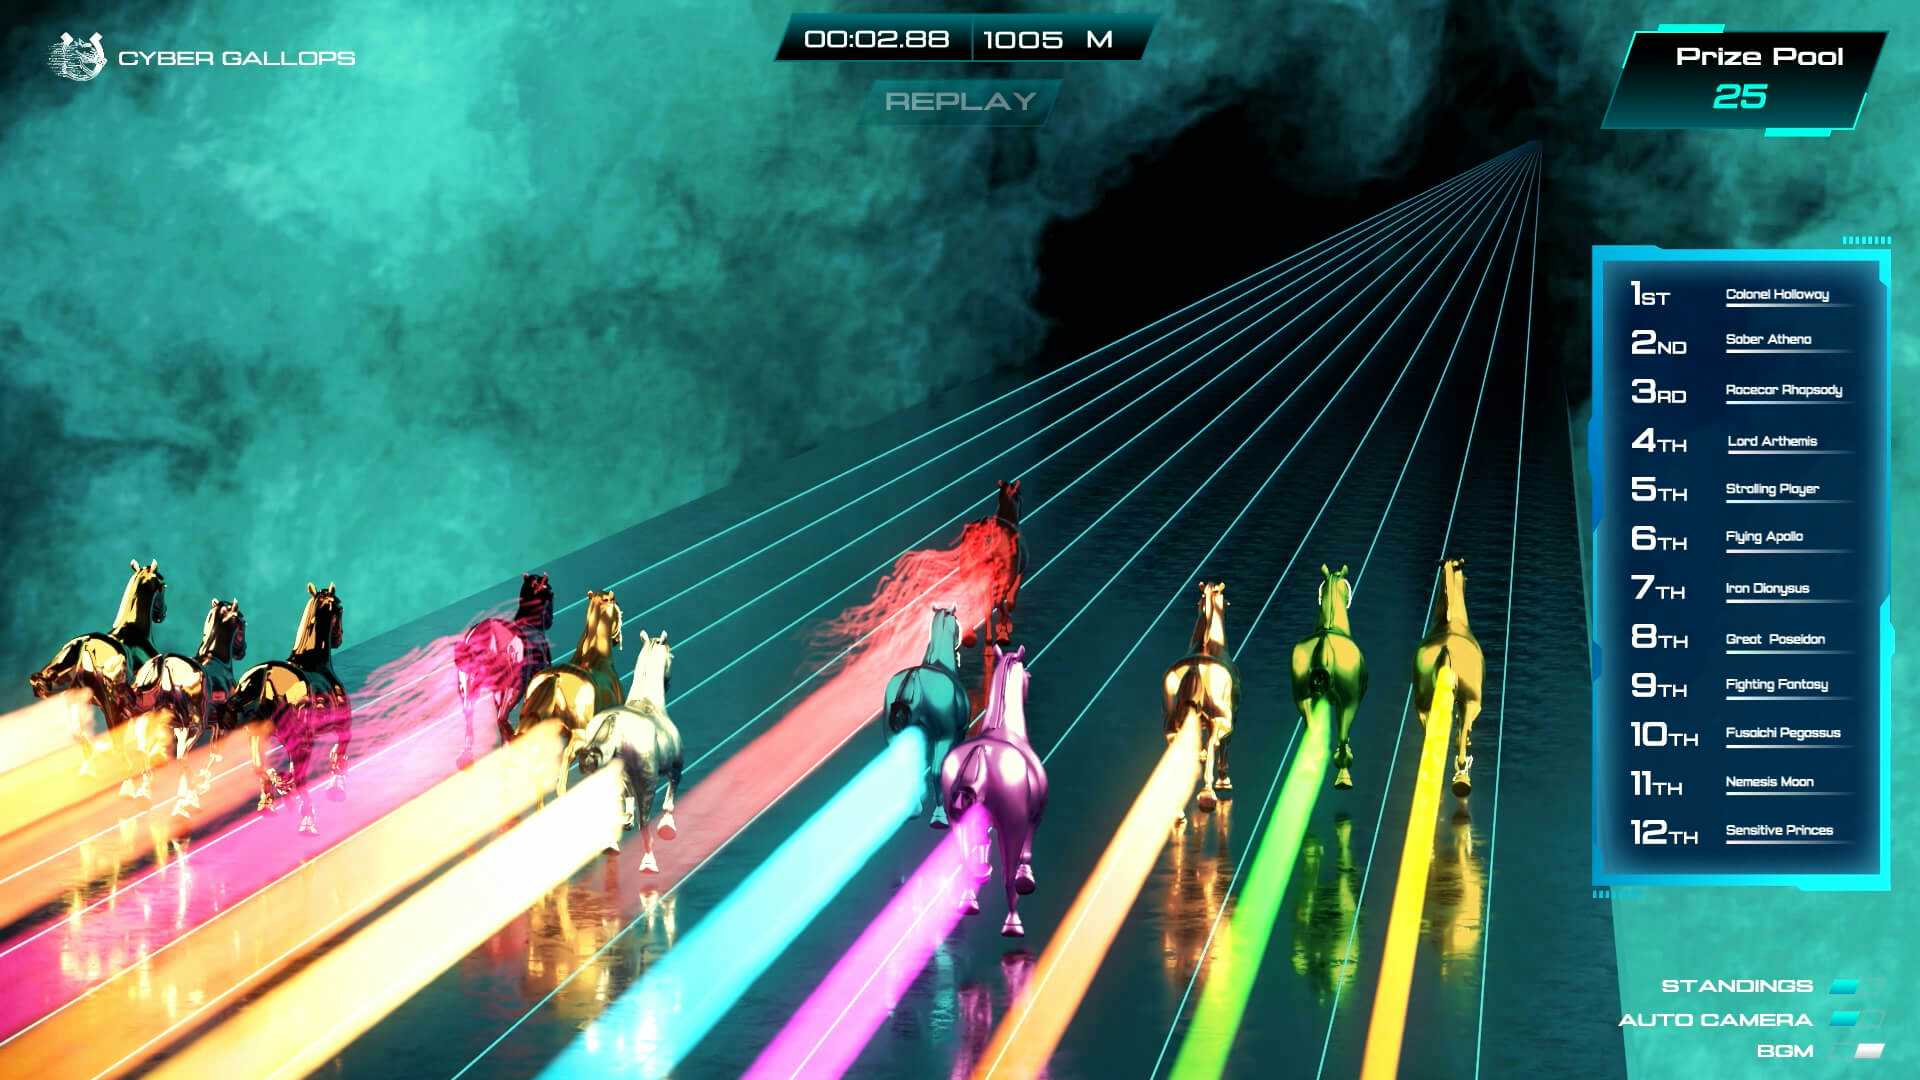 game image from Cyber Gallops